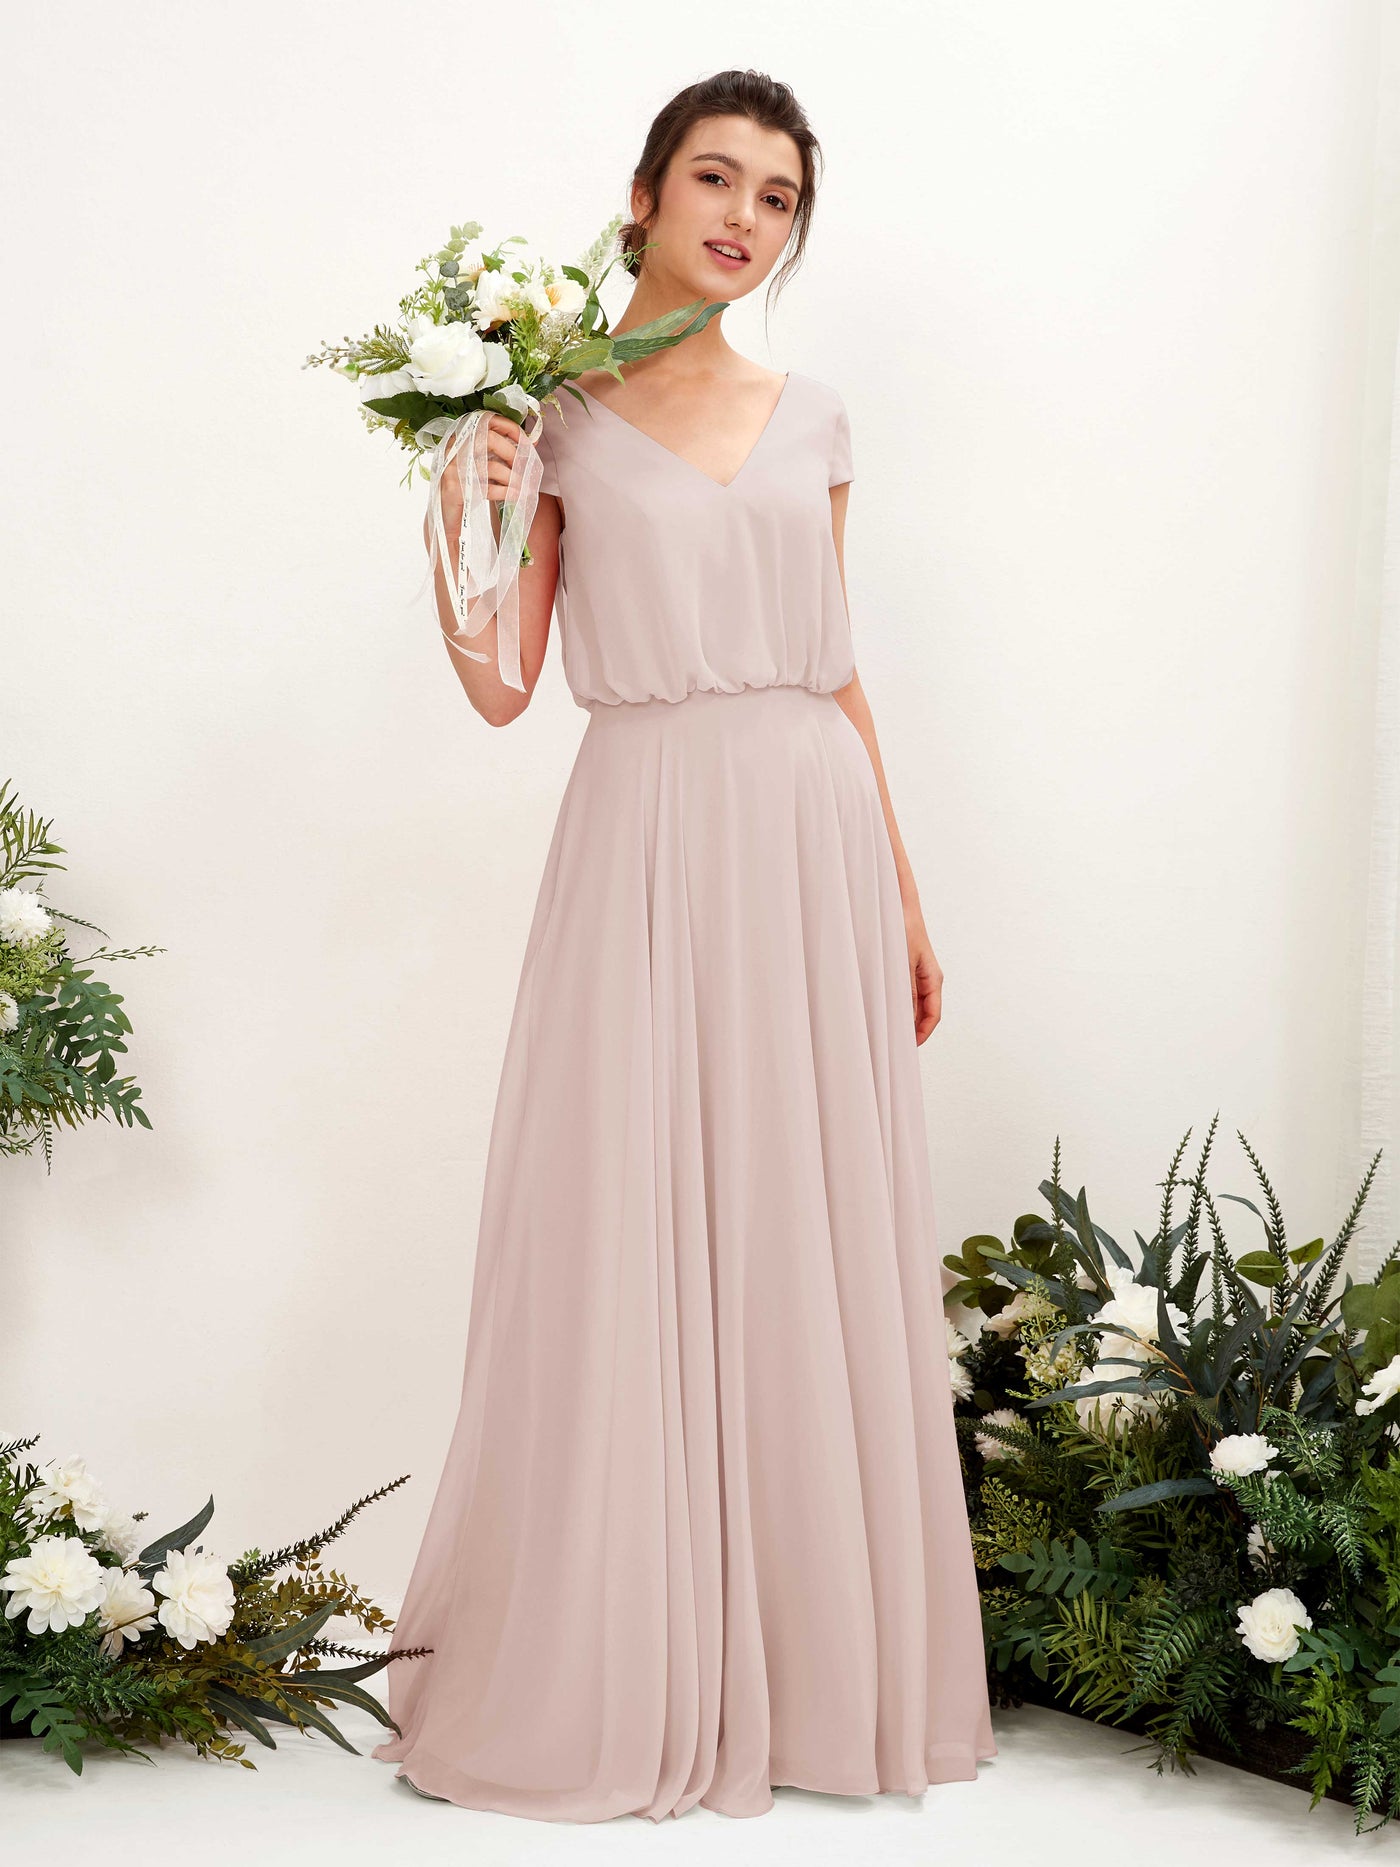 Biscotti Bridesmaid Dresses Bridesmaid Dress A-line Chiffon V-neck Full Length Short Sleeves Wedding Party Dress (81221835)#color_biscotti